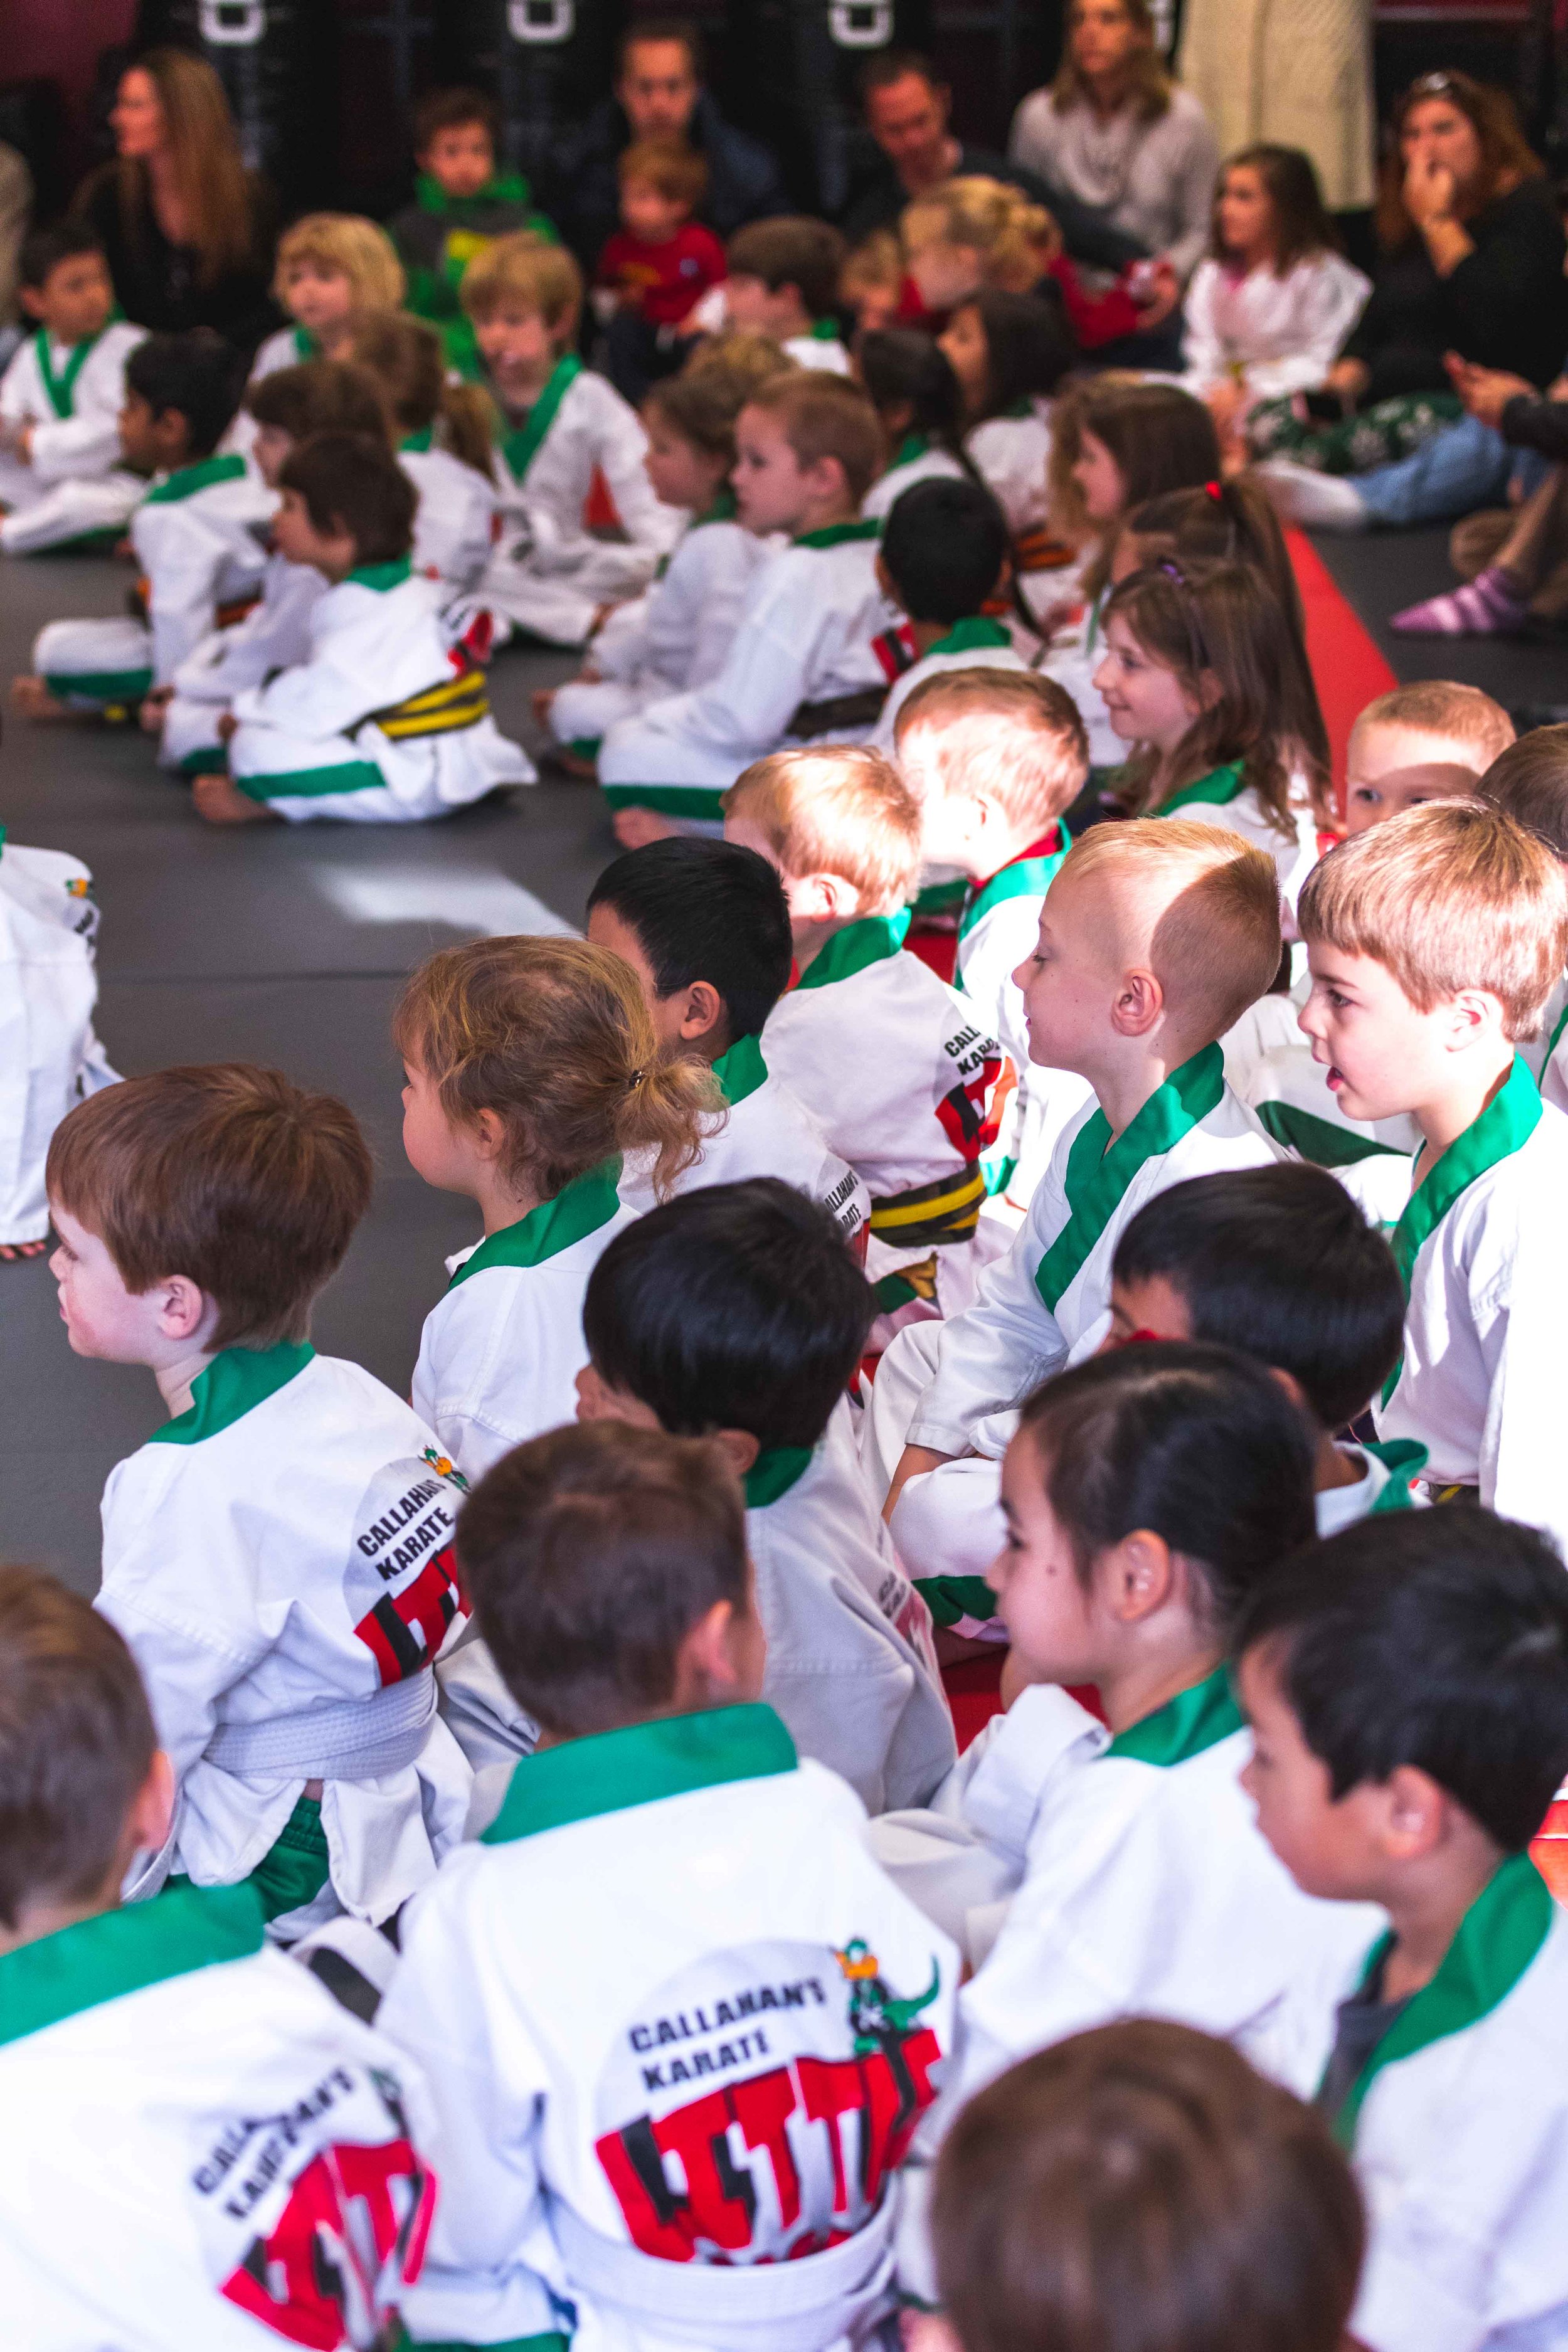 Callahans Karate Family Martial Arts Studio Bedford MA Classes for Kids teenagers and adults in Bedford MA 2.jpg